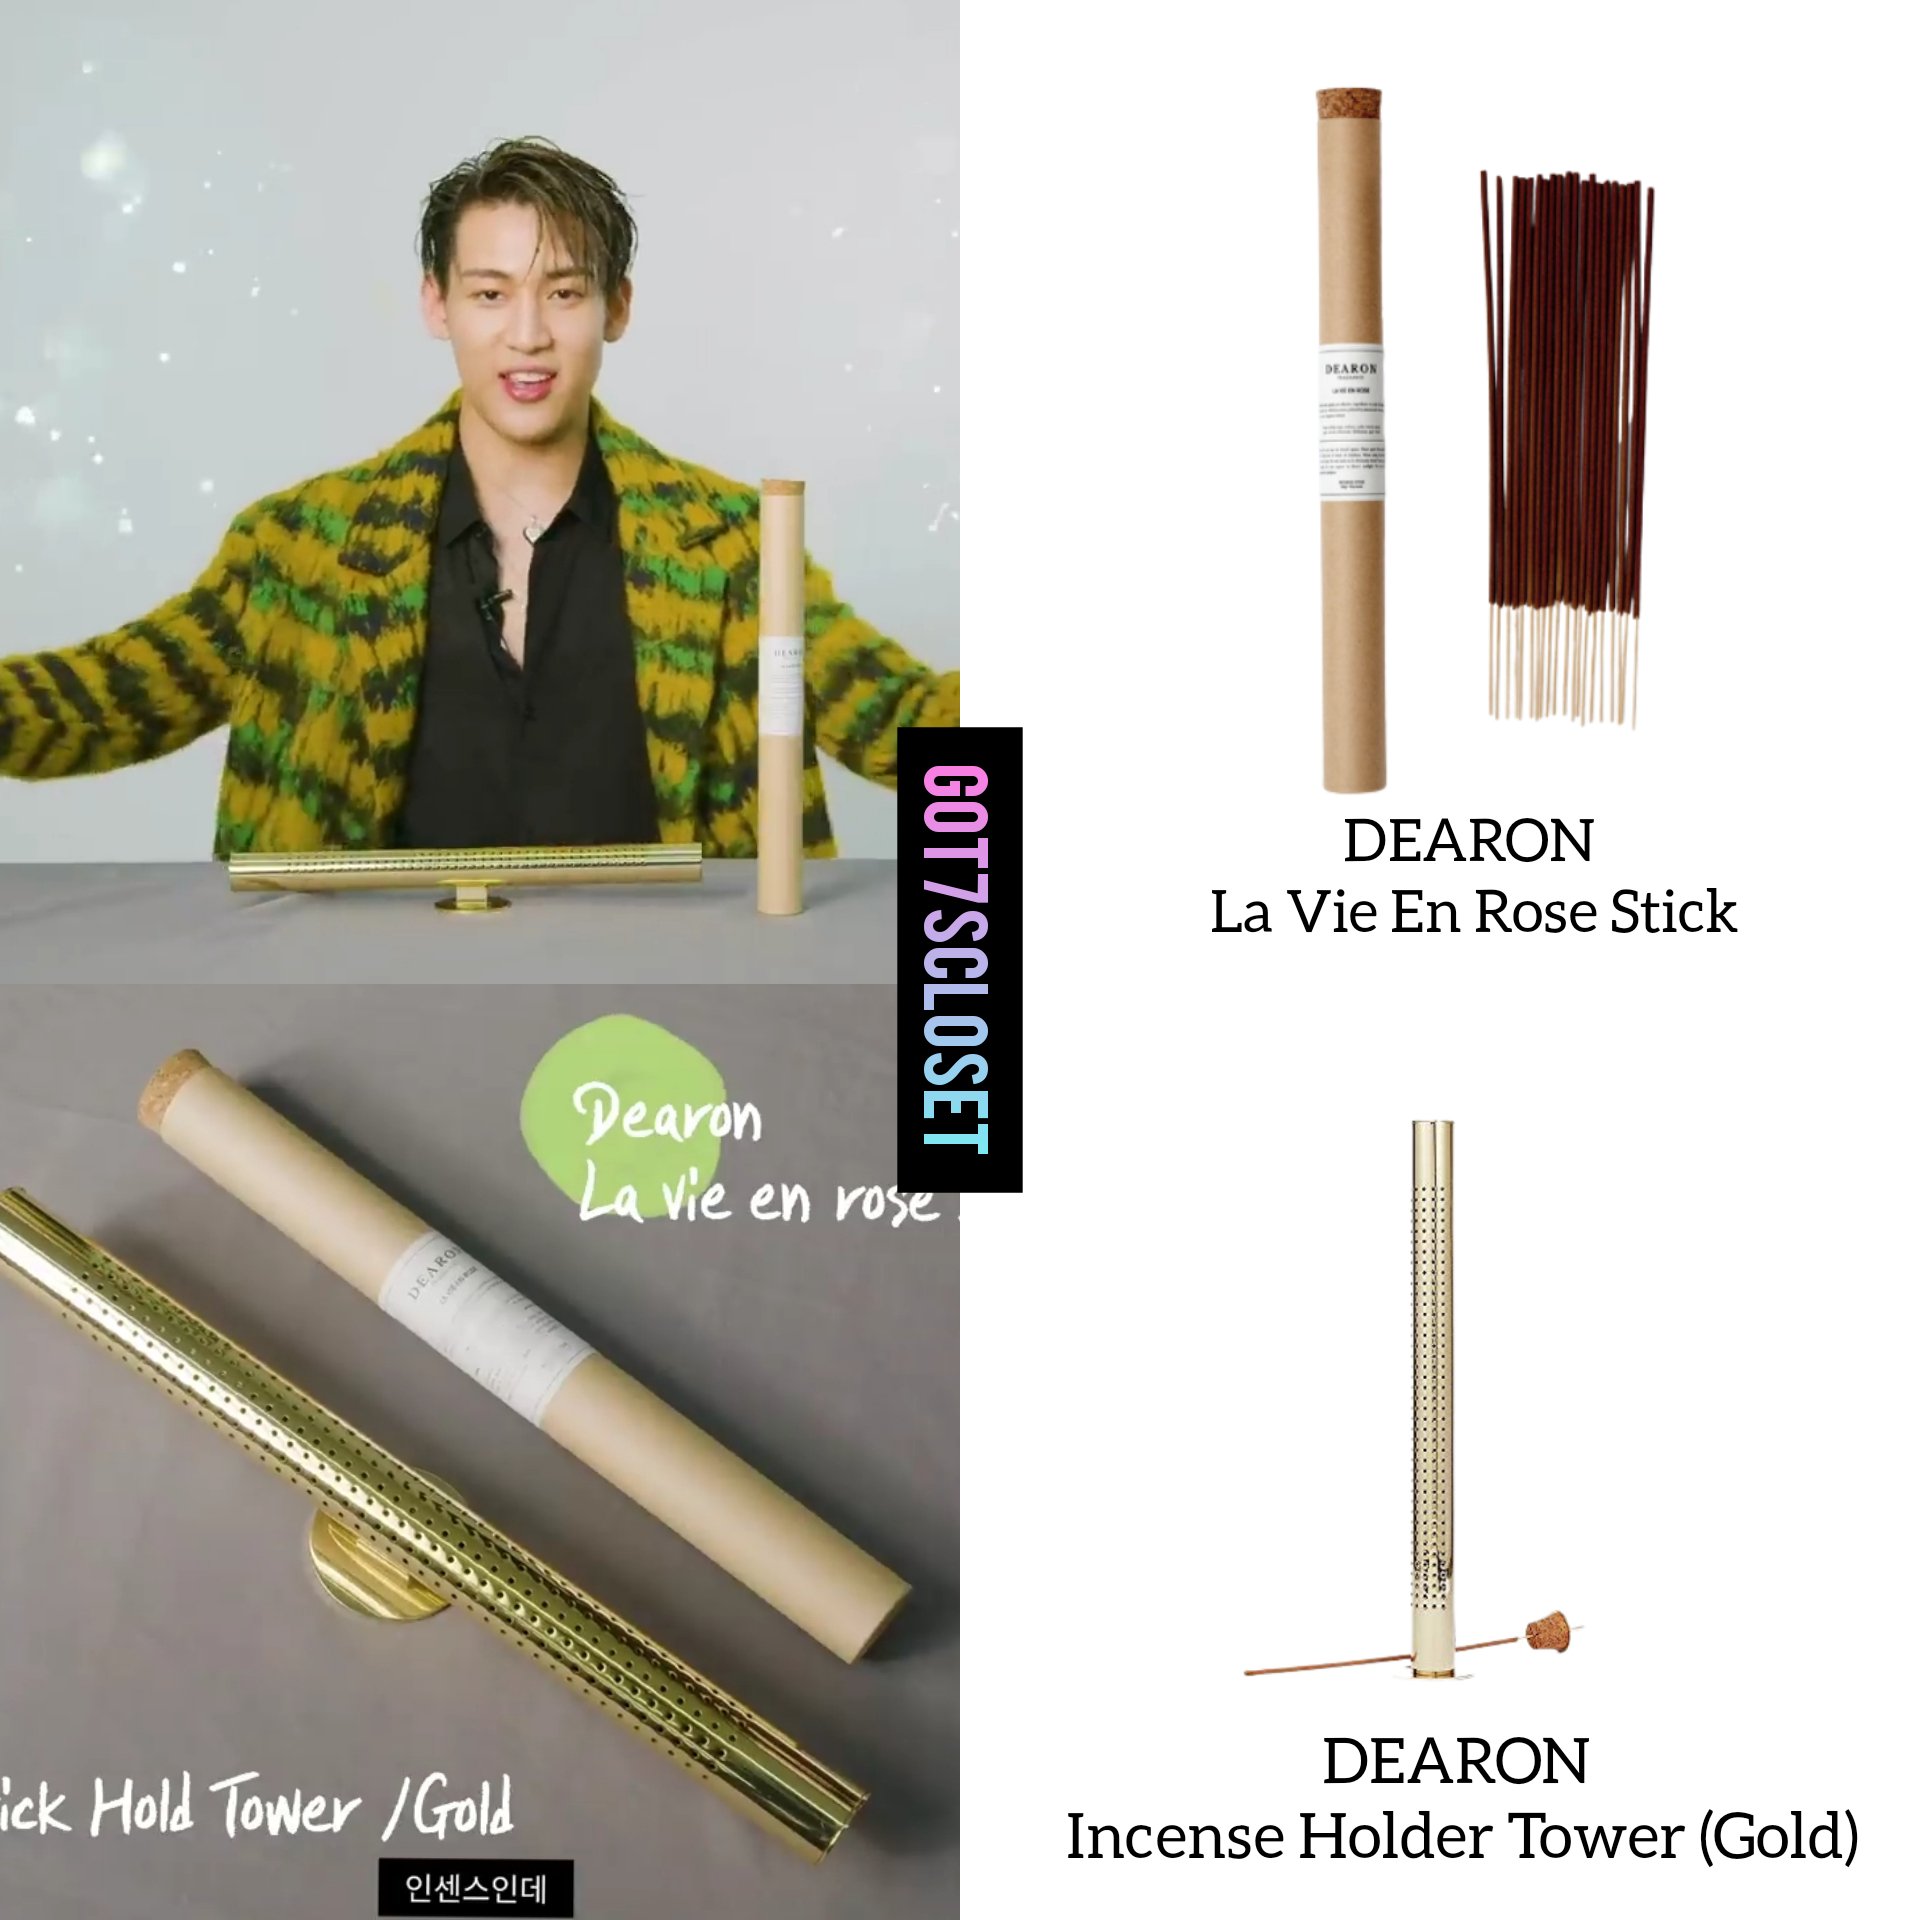 GOT7's fashion (fan account) on X: [230827] Bambam - #ExaFMxBamBam •  DIESEL - J Prom Fringes. $795 USD. •LOUIS VUITTON - Washed Wavy Denim Pants.  £1,510 or $1,900 USD. • GENTLE MONSTER 